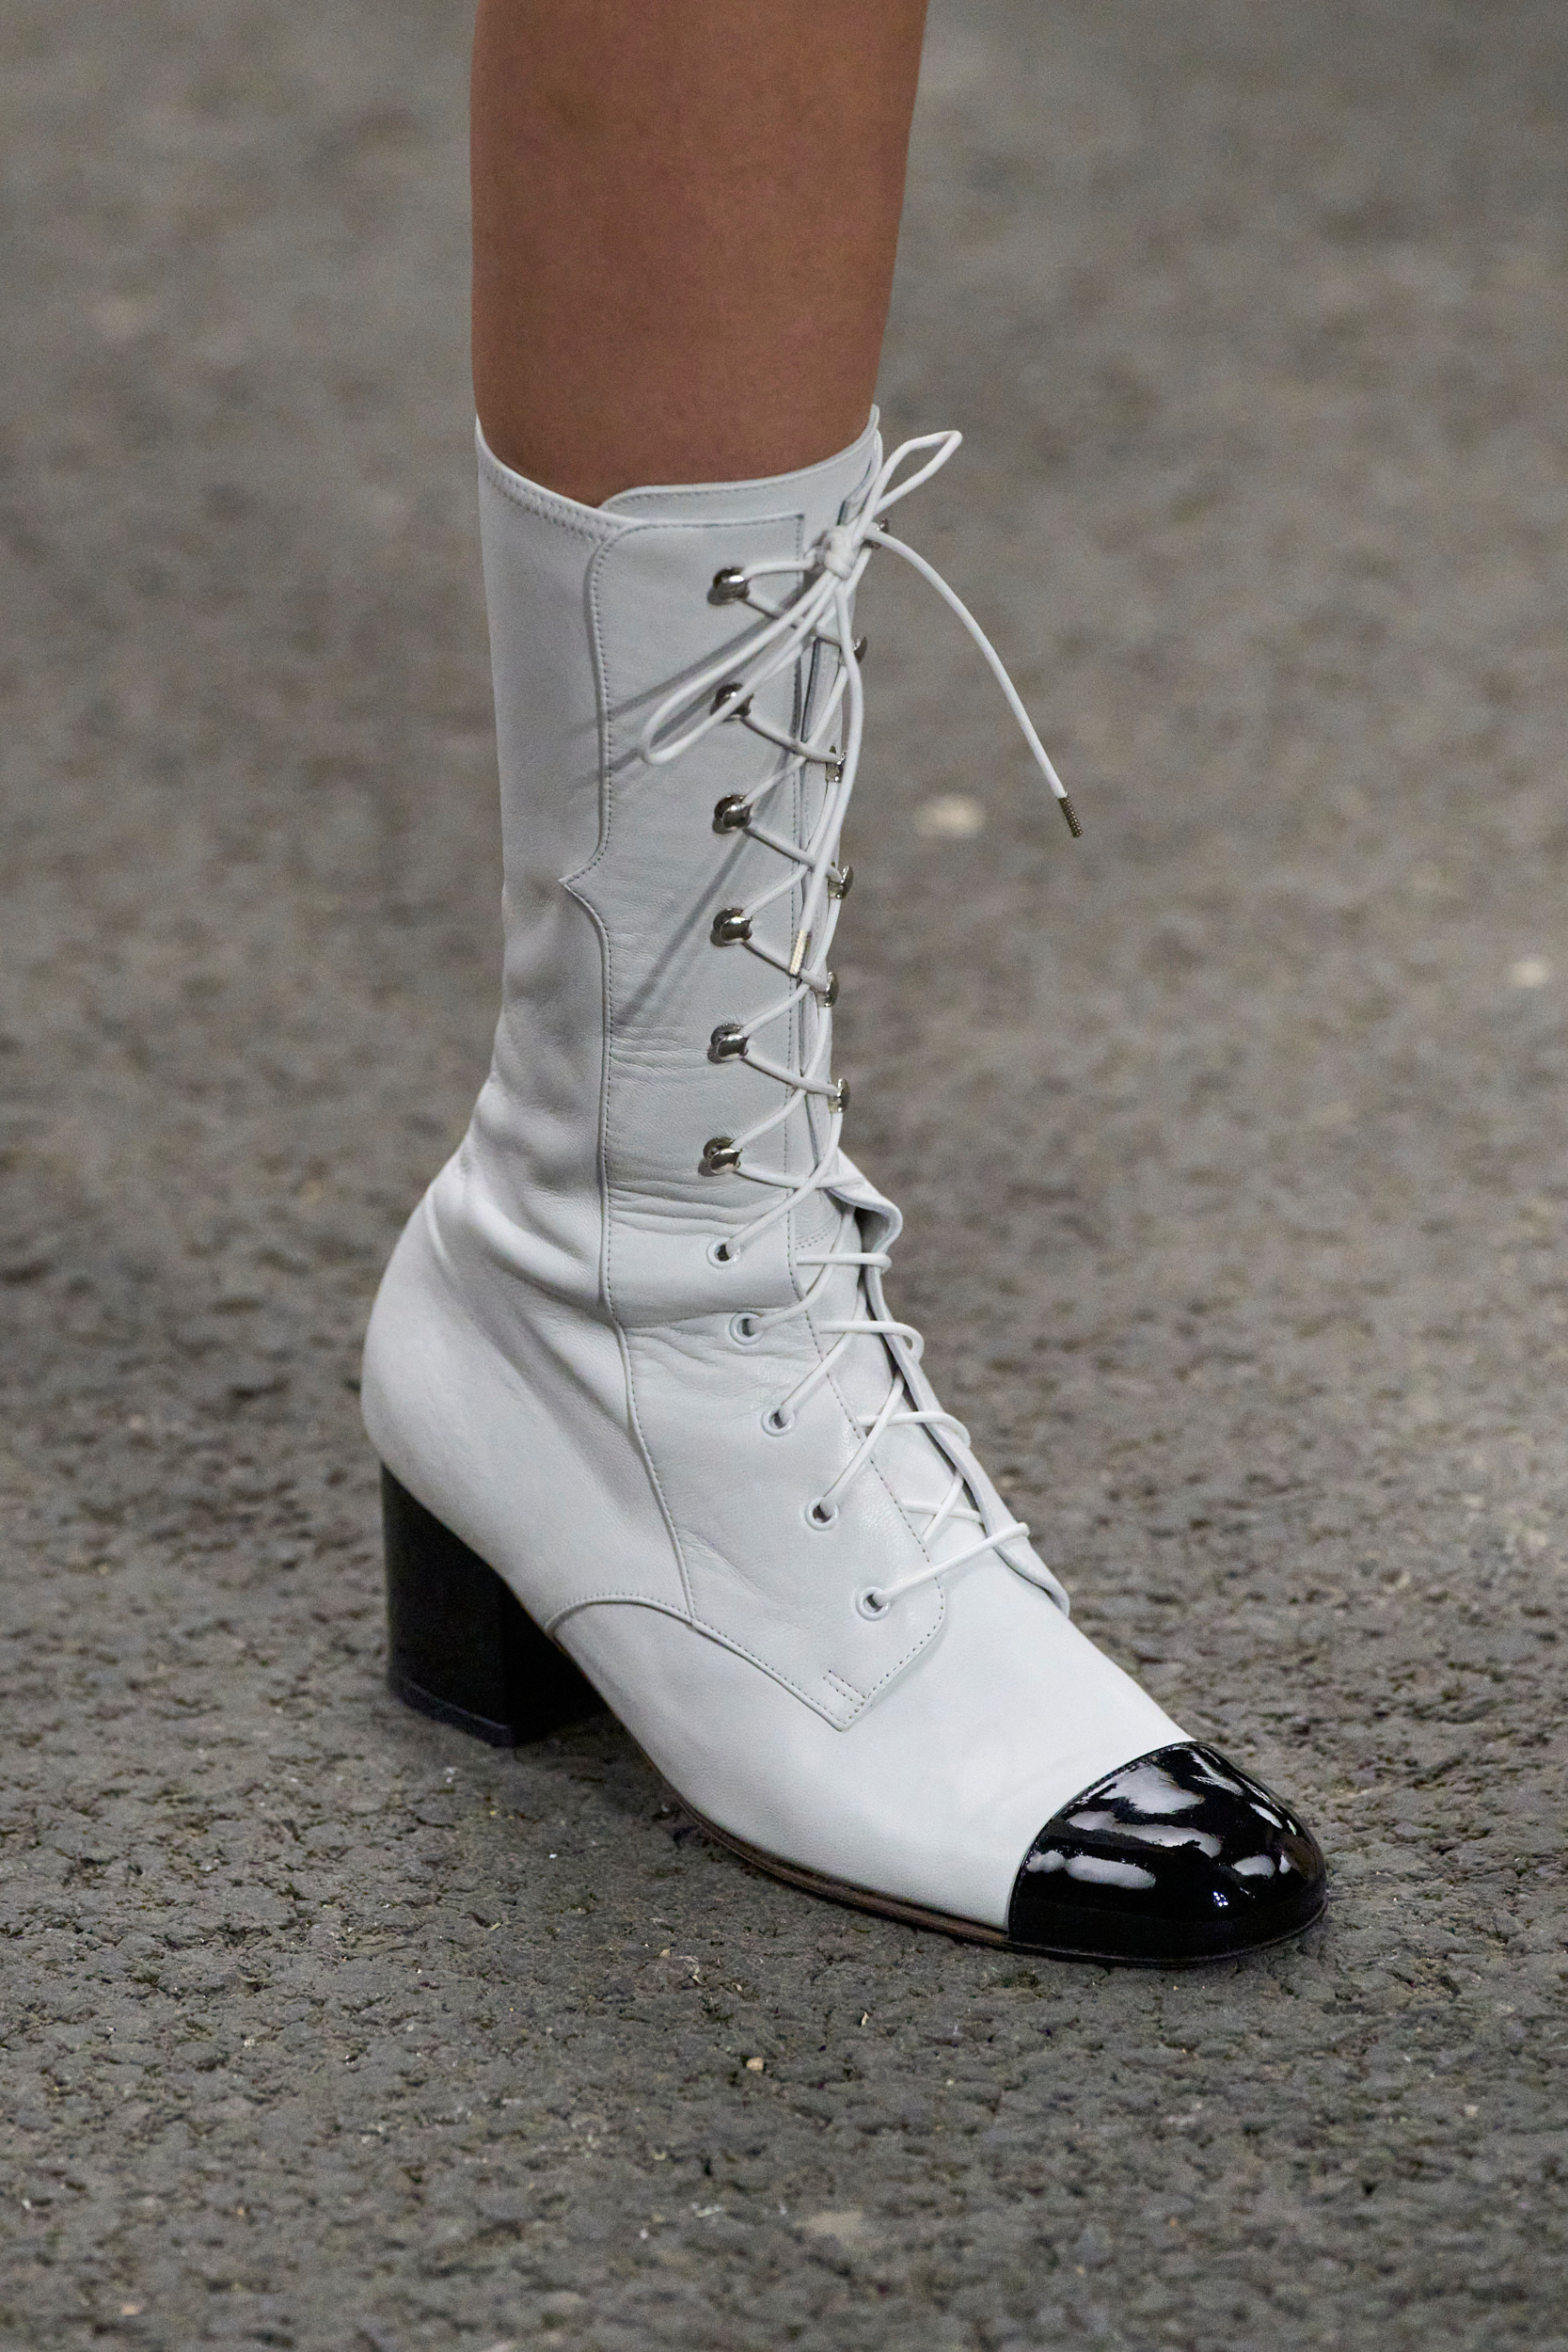 Chanel Put a Provocative Twist on Its Classic Shoe For Spring Summer 2023